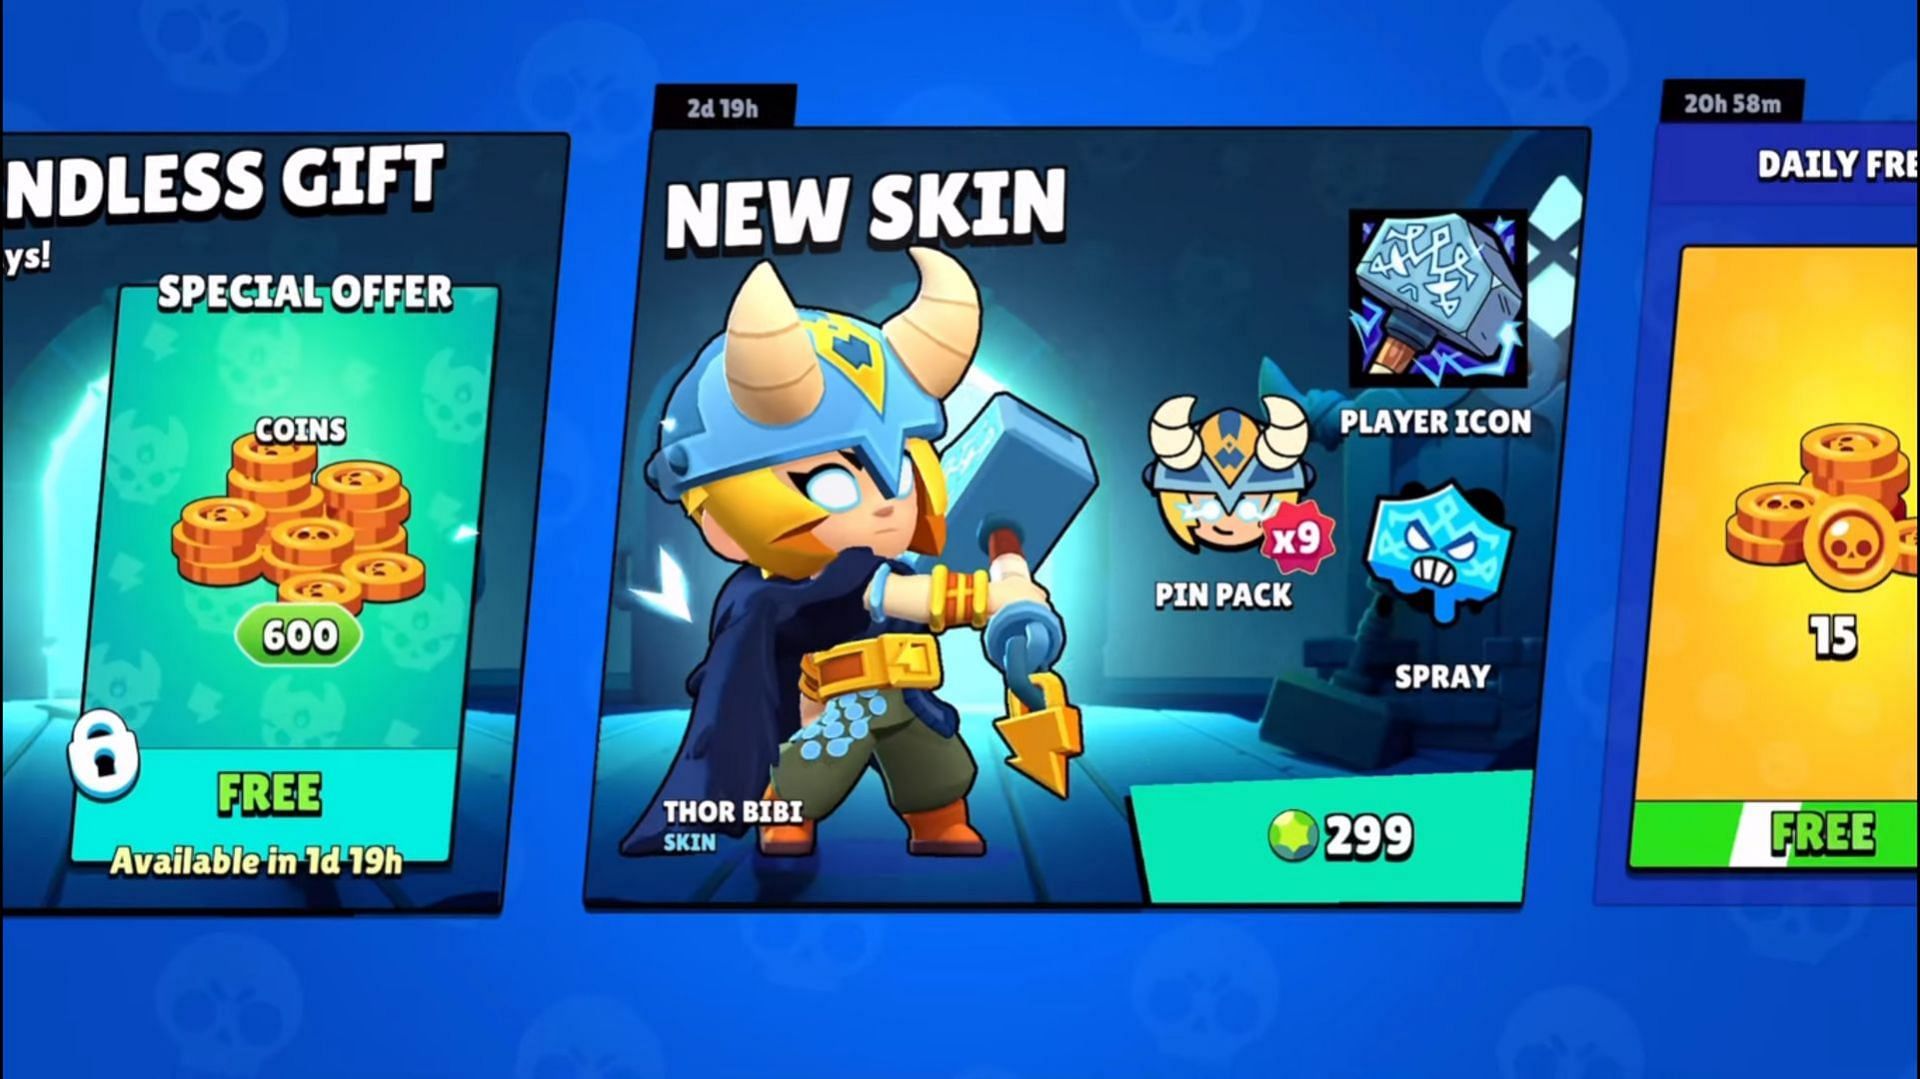 Required cost of purchase (Image via Supercell)